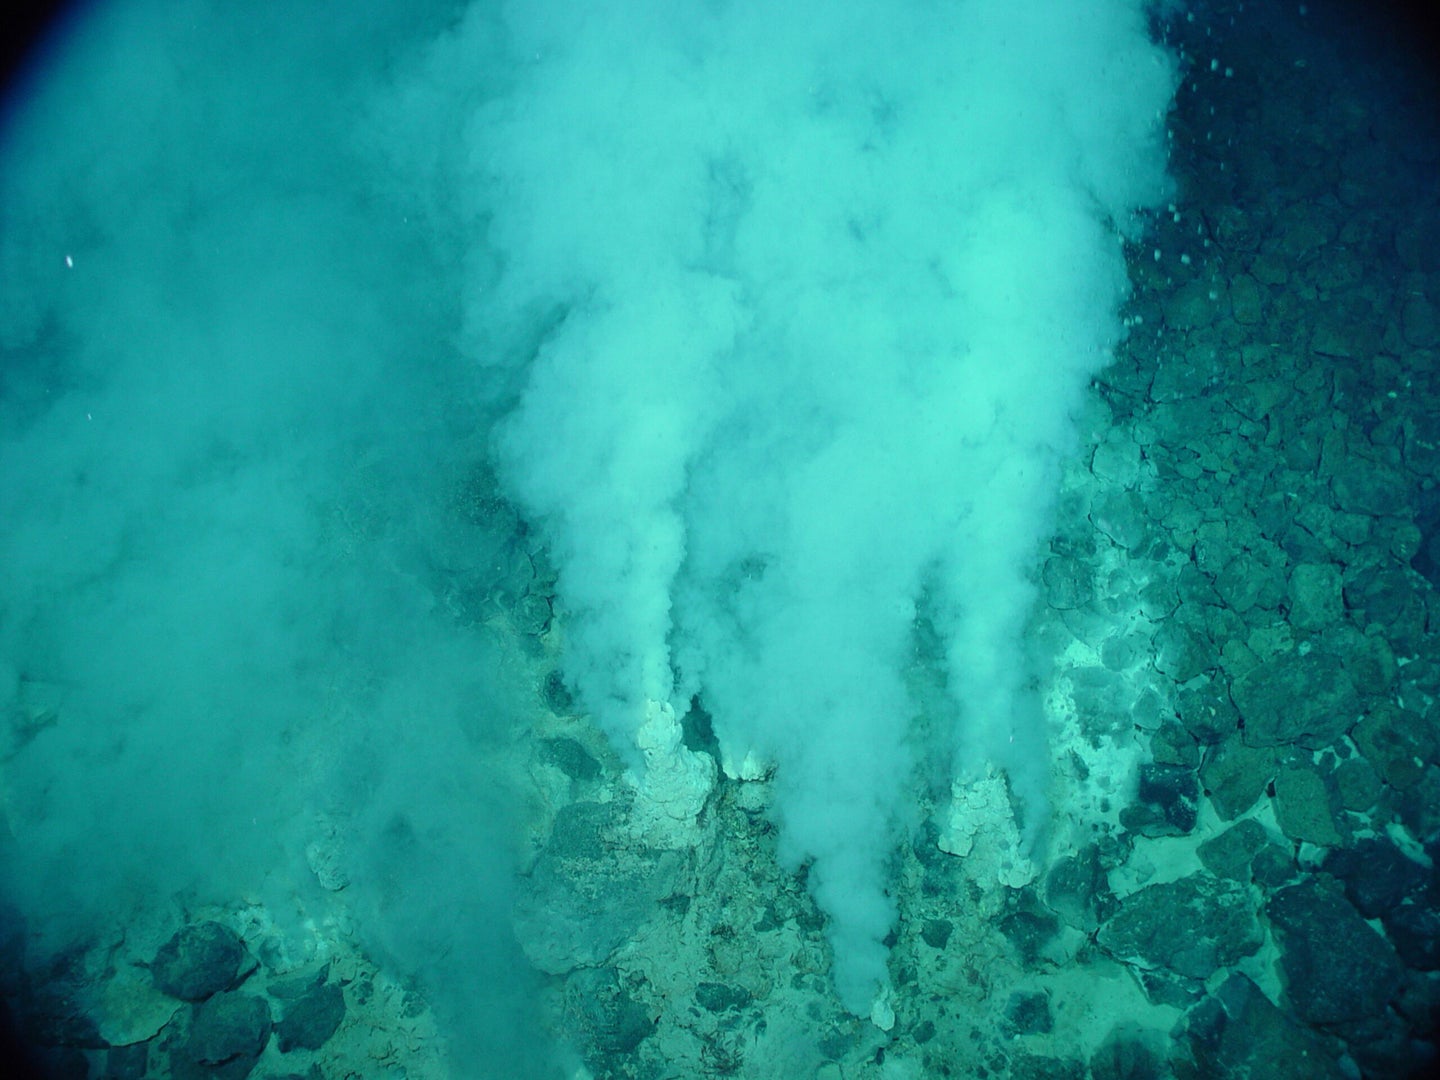 vents of white bubbles rising up from ocean floor